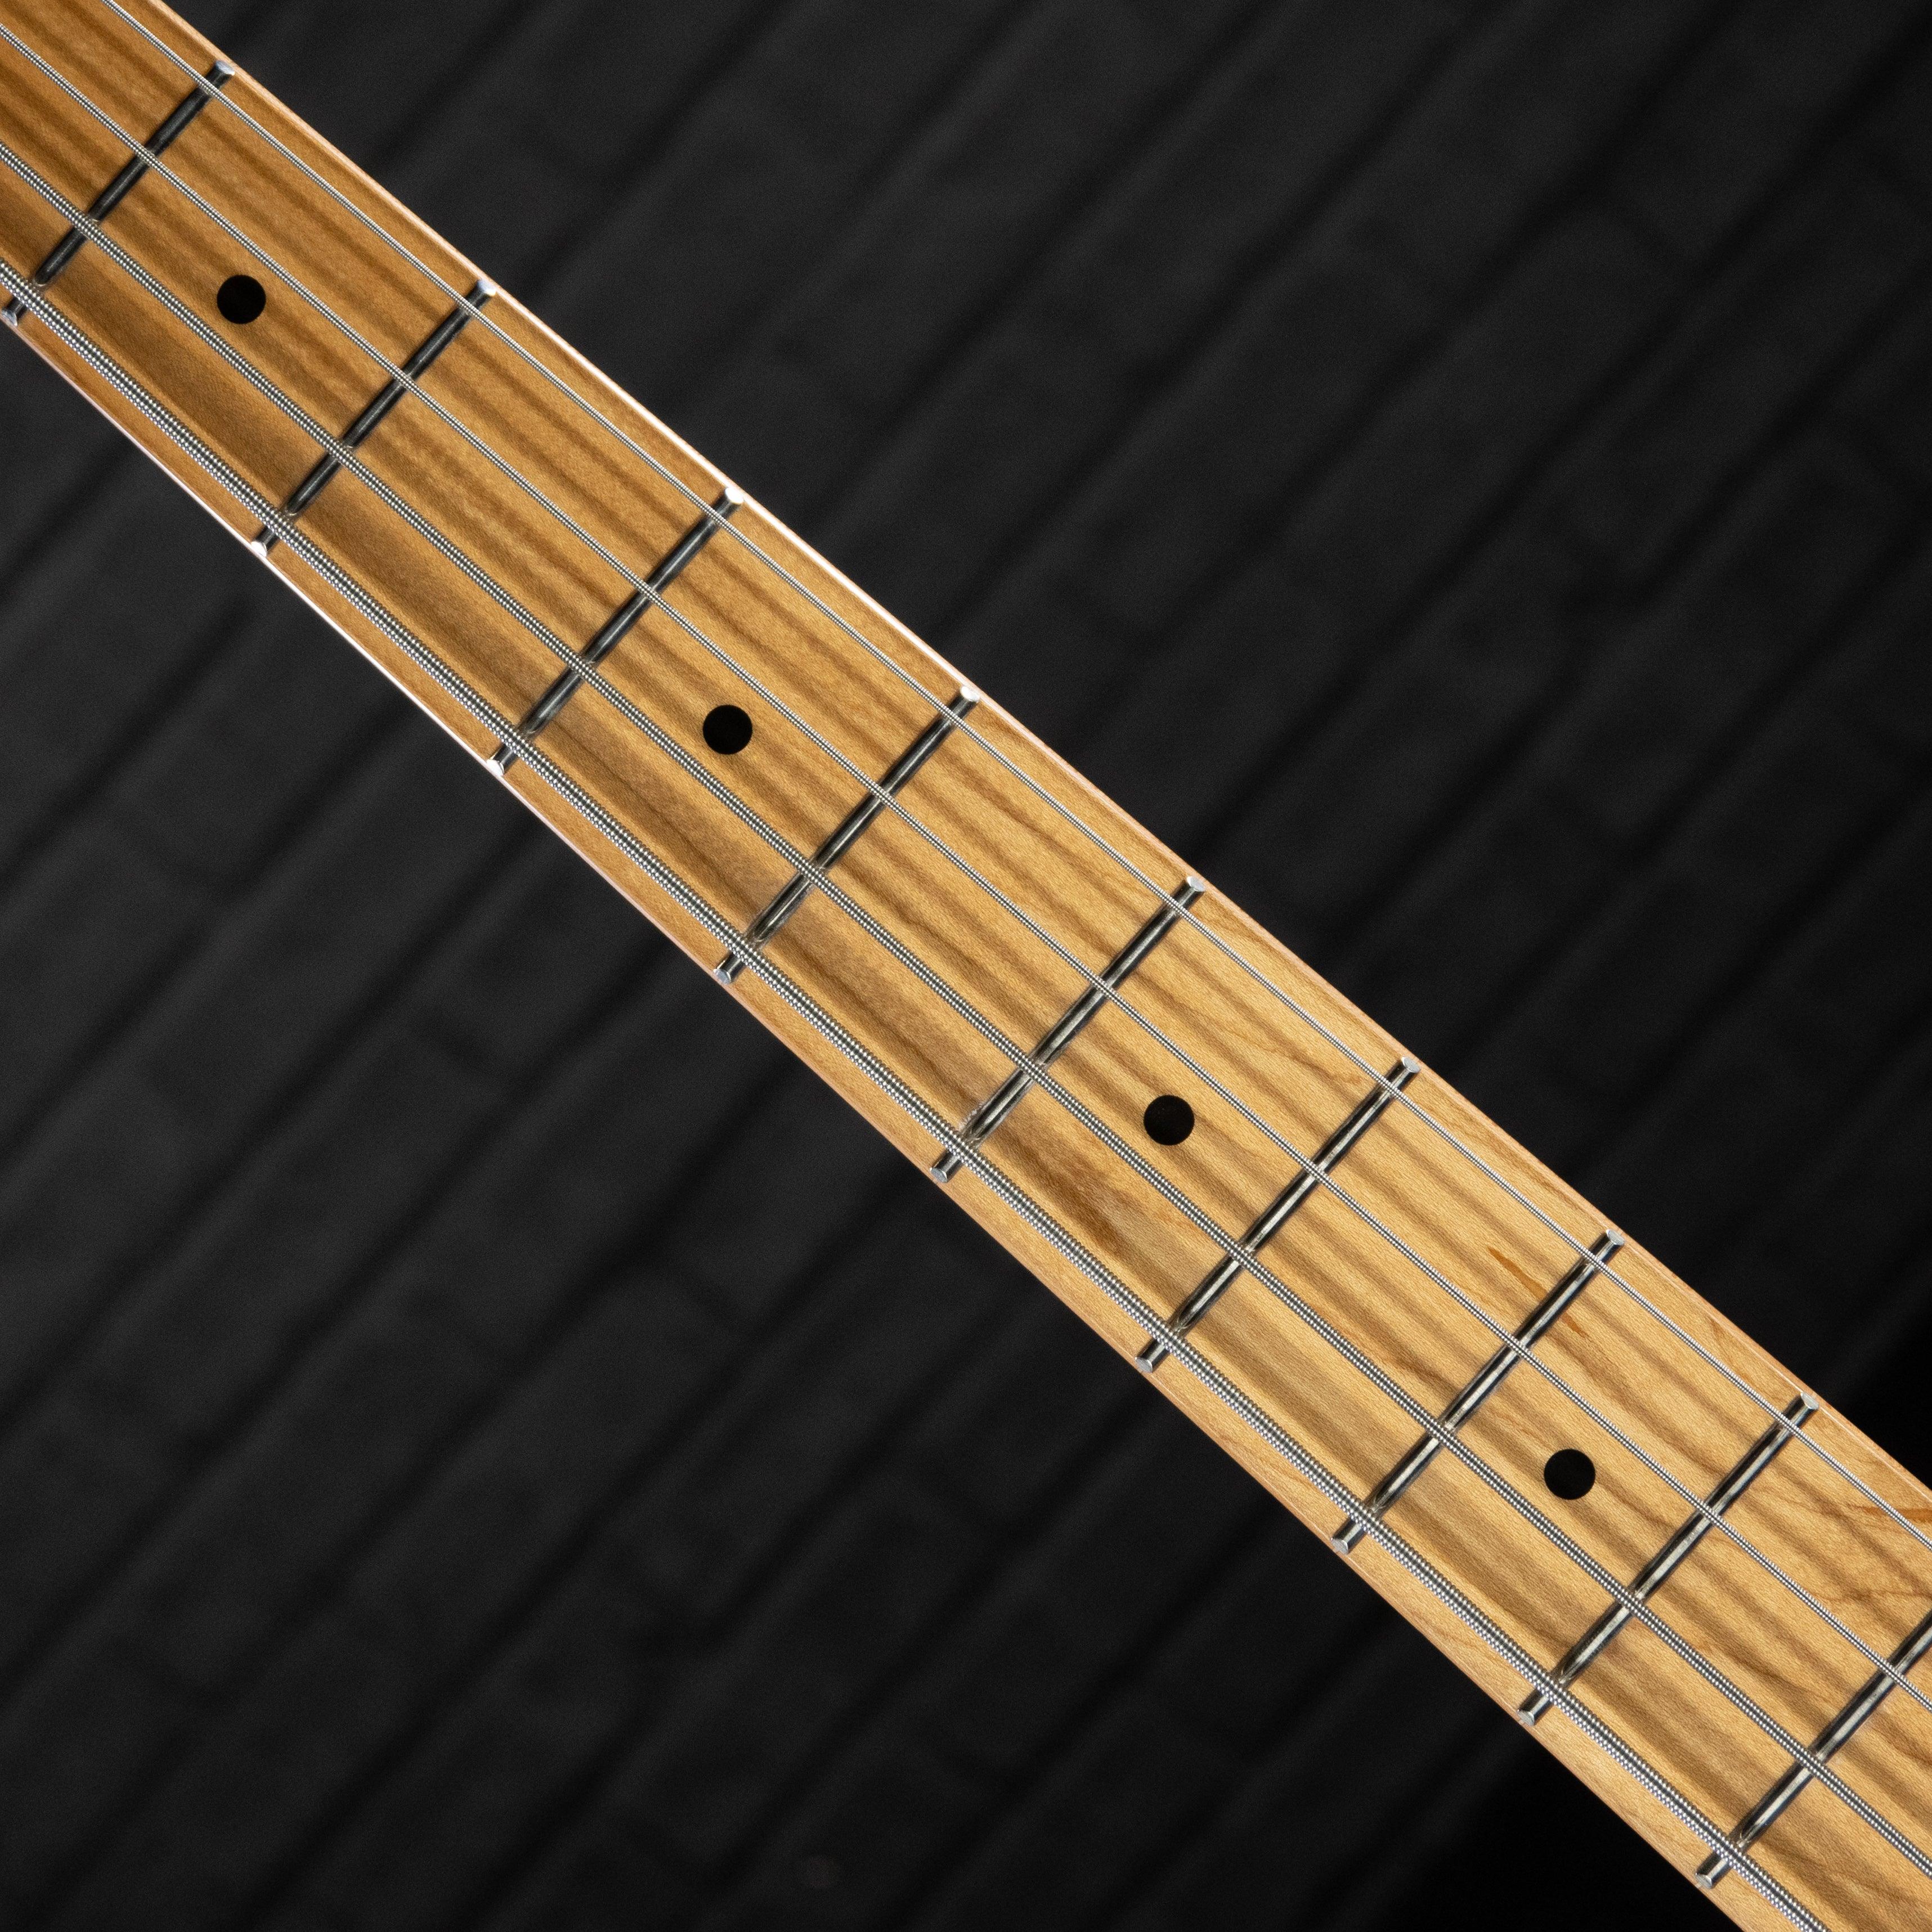 Tagima TW-66 4-String Electric Bass Guitar (Butterscotch) - Impulse Music Co.